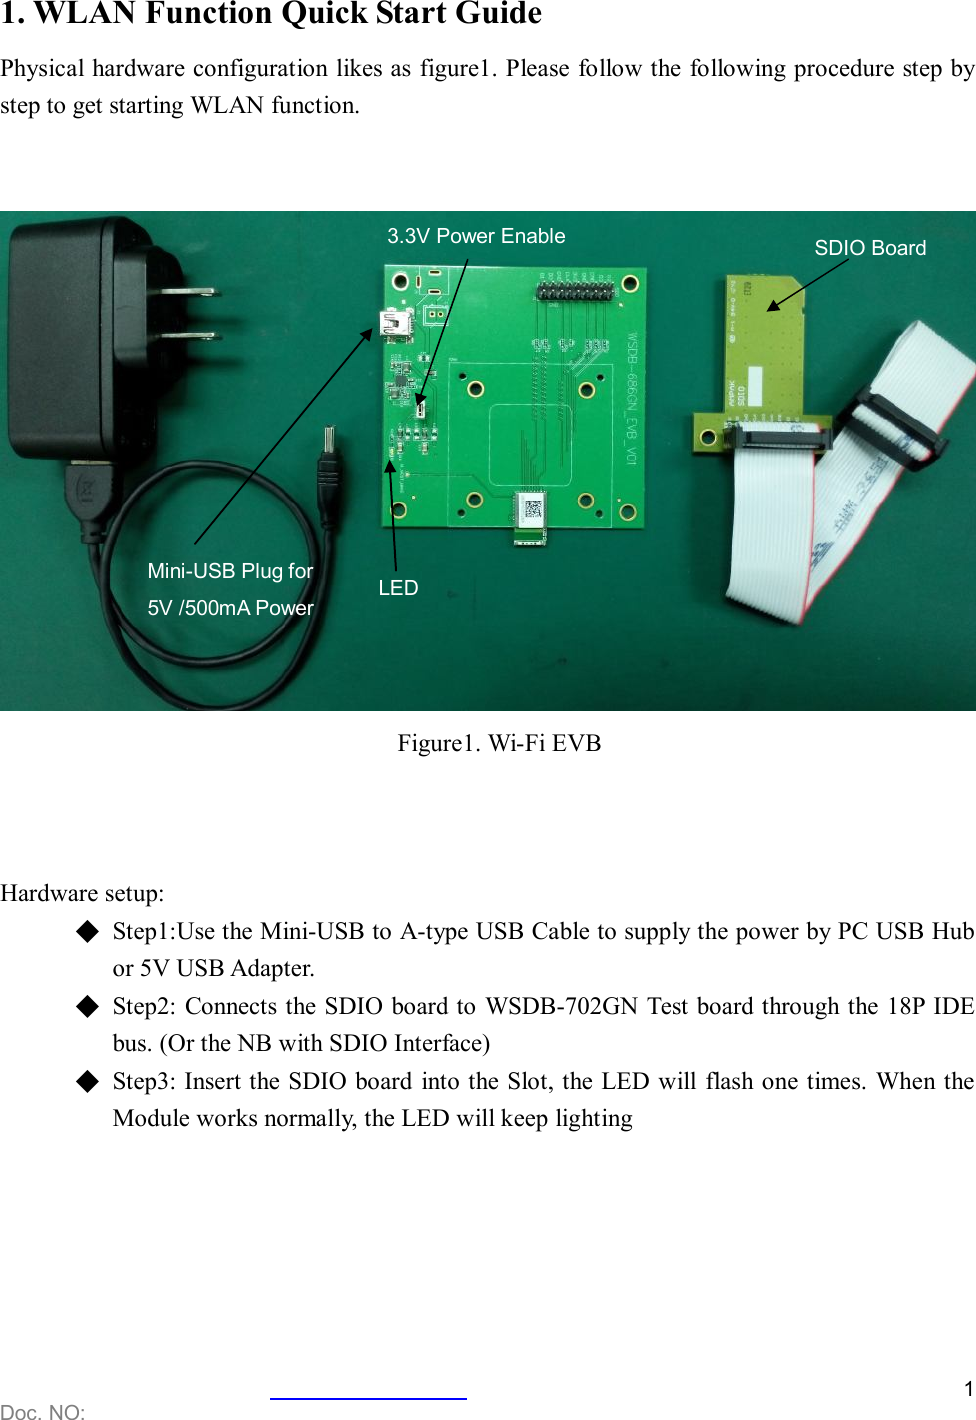    Doc. NO:   1    1. WLAN Function Quick Start Guide Physical hardware configuration likes as figure1. Please follow the following procedure step by step to get starting WLAN function.        Figure1. Wi-Fi EVB    Hardware setup: ◆  Step1:Use the Mini-USB to A-type USB Cable to supply the power by PC USB Hub or 5V USB Adapter. ◆  Step2: Connects the SDIO board to WSDB-702GN Test board through the 18P IDE bus. (Or the NB with SDIO Interface) ◆  Step3: Insert the SDIO board  into the Slot, the LED will  flash one times. When the Module works normally, the LED will keep lighting      Mini-USB Plug for   5V /500mA Power 3.3V Power Enable  SDIO Board LED 